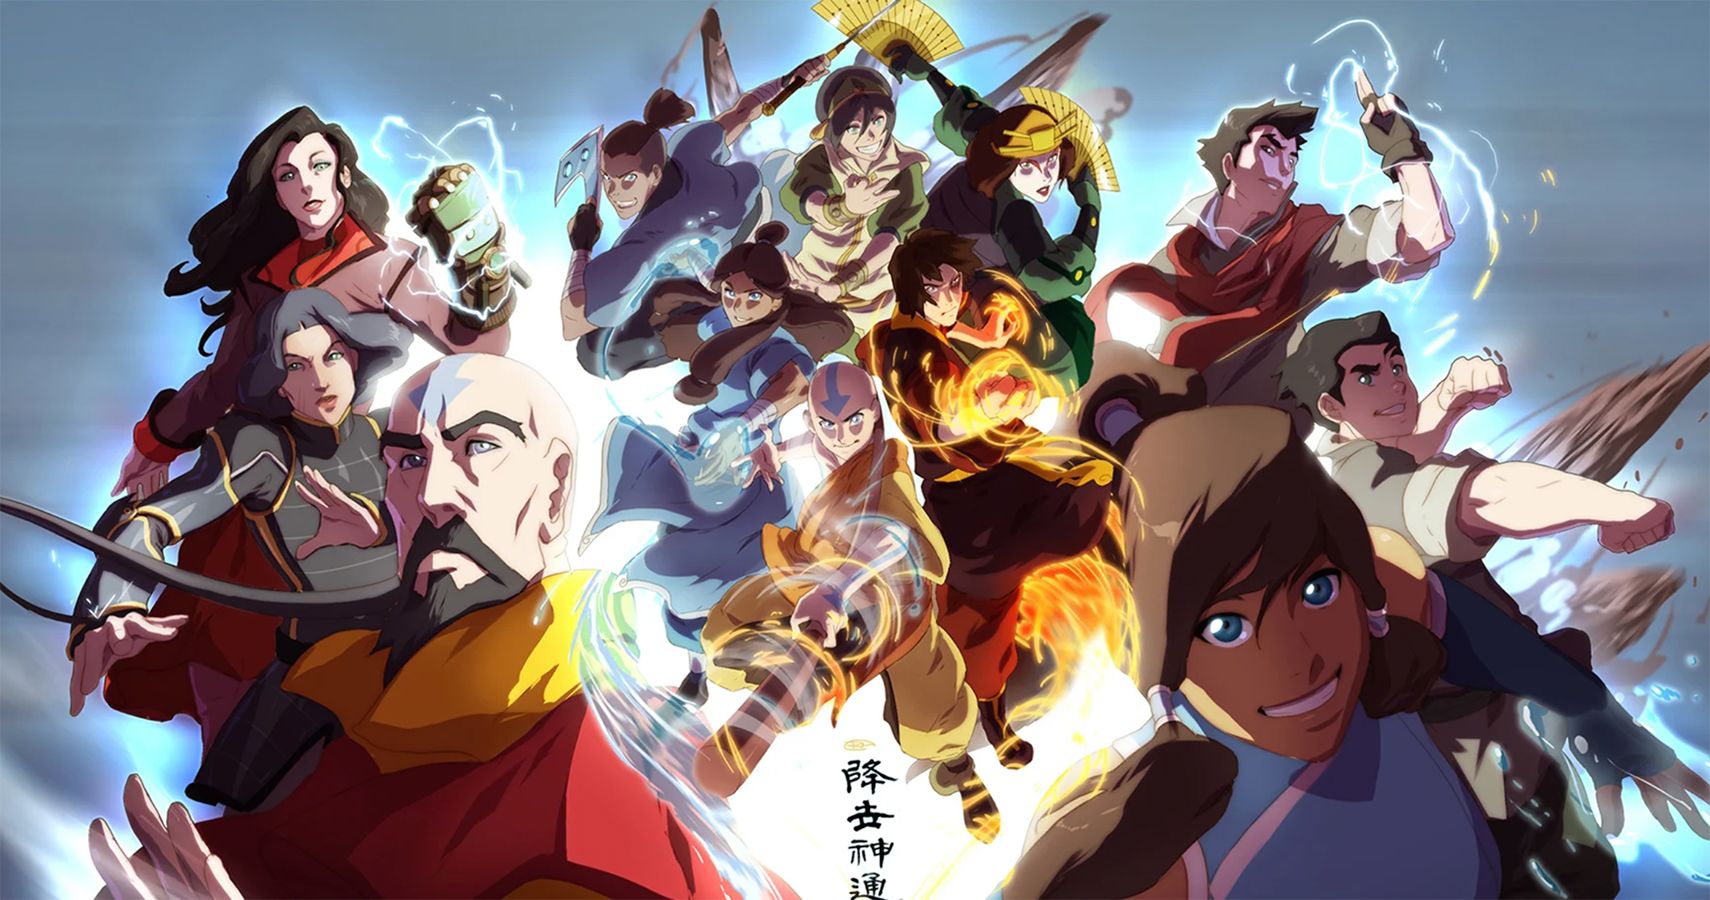 Is it fair to compare Avatar The Last Airbender to The Legend of Korra   Quora